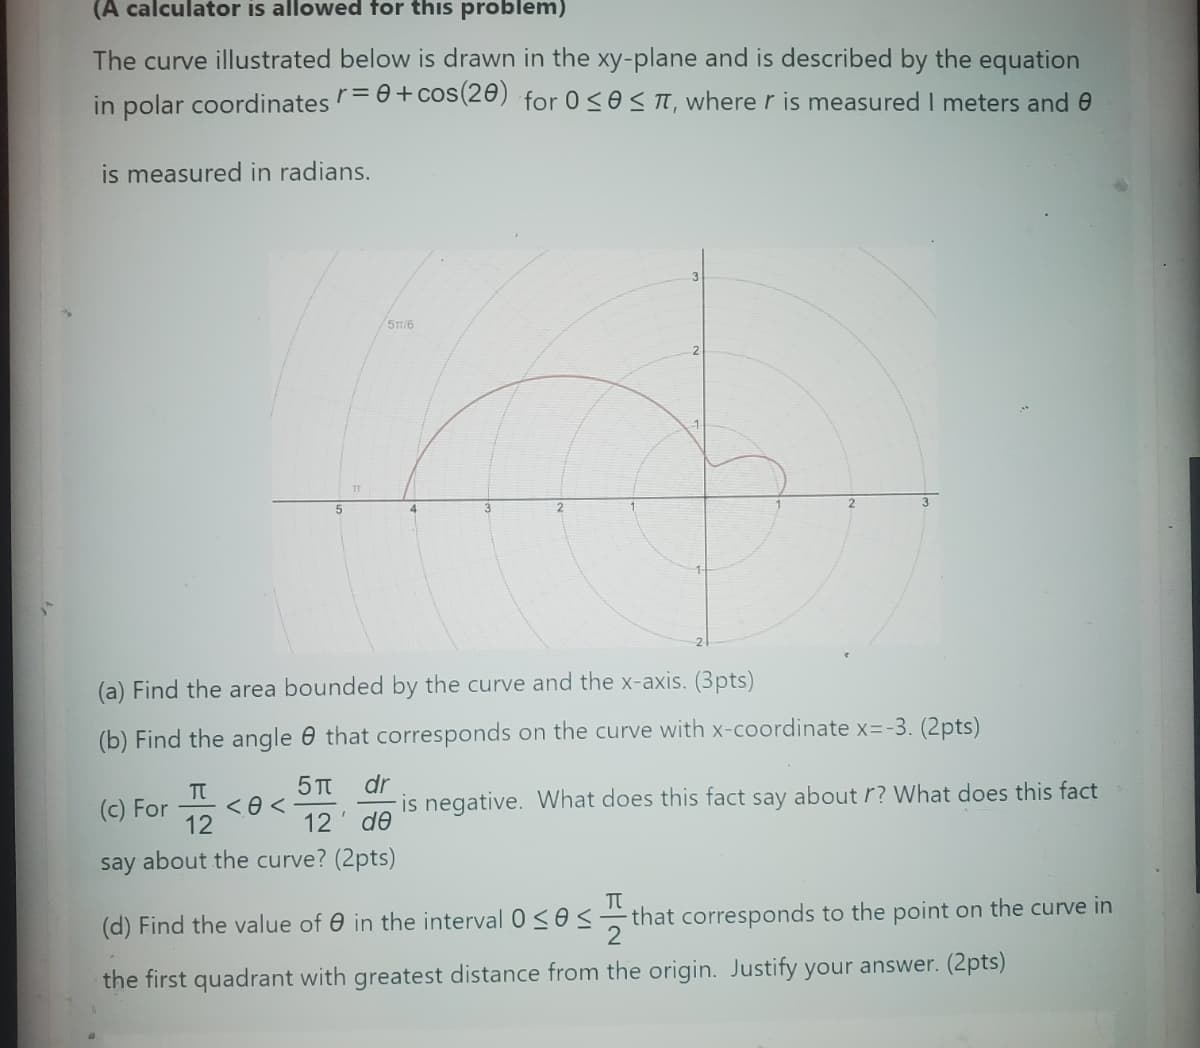 (A calculator is allowed for this problem)
The curve illustrated below is drawn in the xy-plane and is described by the equation
in polar coordinates r = 0 + cos(20) for 0≤0≤ πT, where r is measured I meters and e
is measured in radians.
ㄢ
51/6
5
4
(a) Find the area bounded by the curve and the x-axis. (3pts)
(b) Find the angle that corresponds on the curve with x-coordinate x=-3. (2pts)
Π
(c) For
==
<0<
5π dr
12 ' ᏧᎾ
say about the curve? (2pts)
is negative. What does this fact say about r? What does this fact
Π
(d) Find the value of in the interval 0≤0≤ that corresponds to the point on the curve in
the first quadrant with greatest distance from the origin. Justify your answer. (2pts)